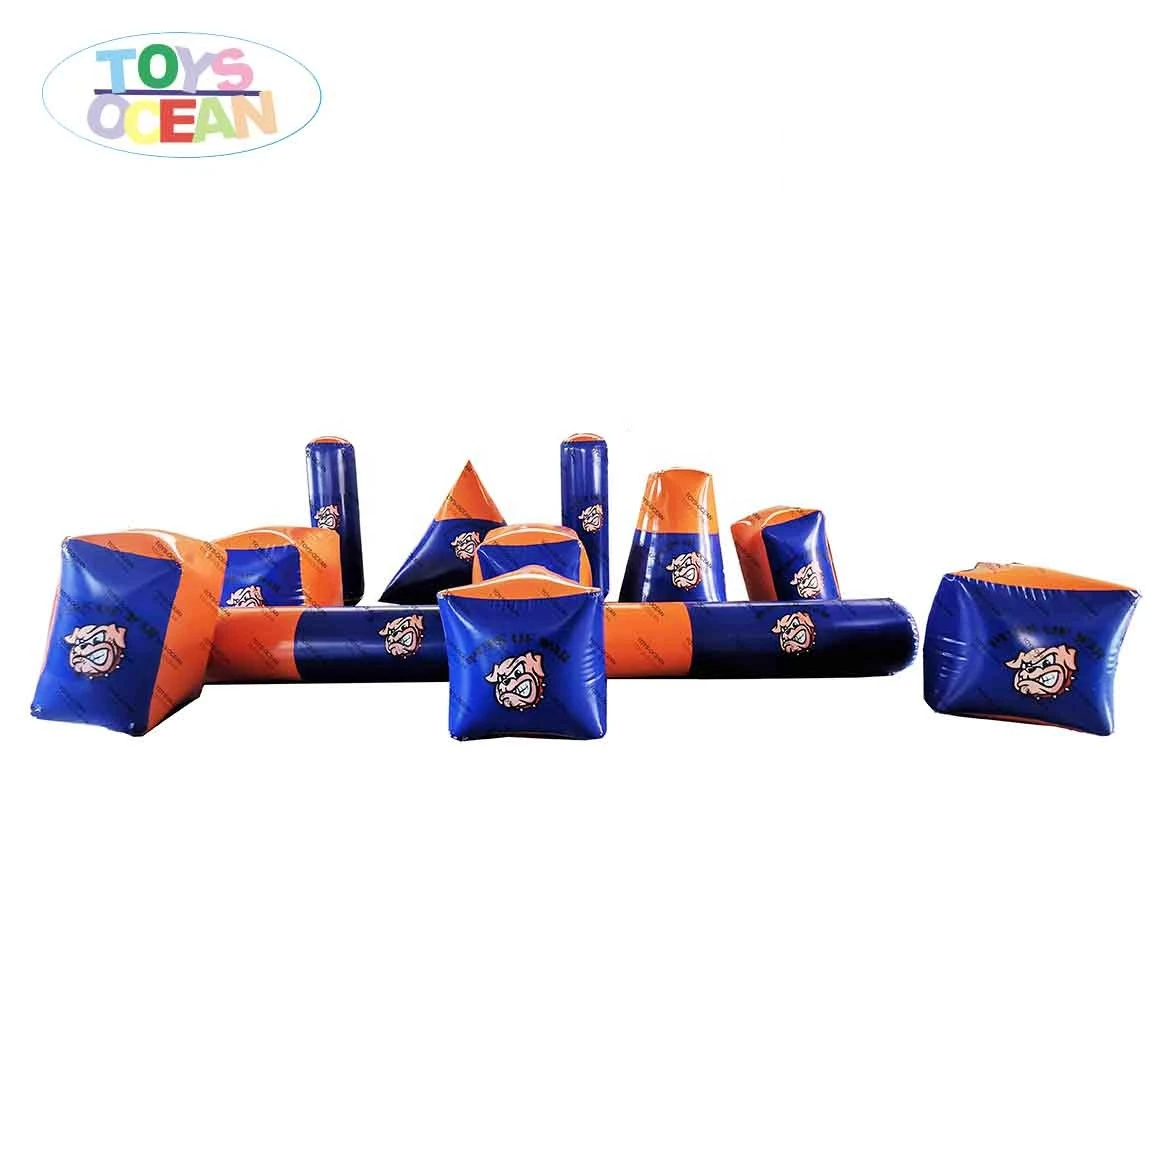 11 pcs inflatable paintball bunker set for shooting event sport with customized logo